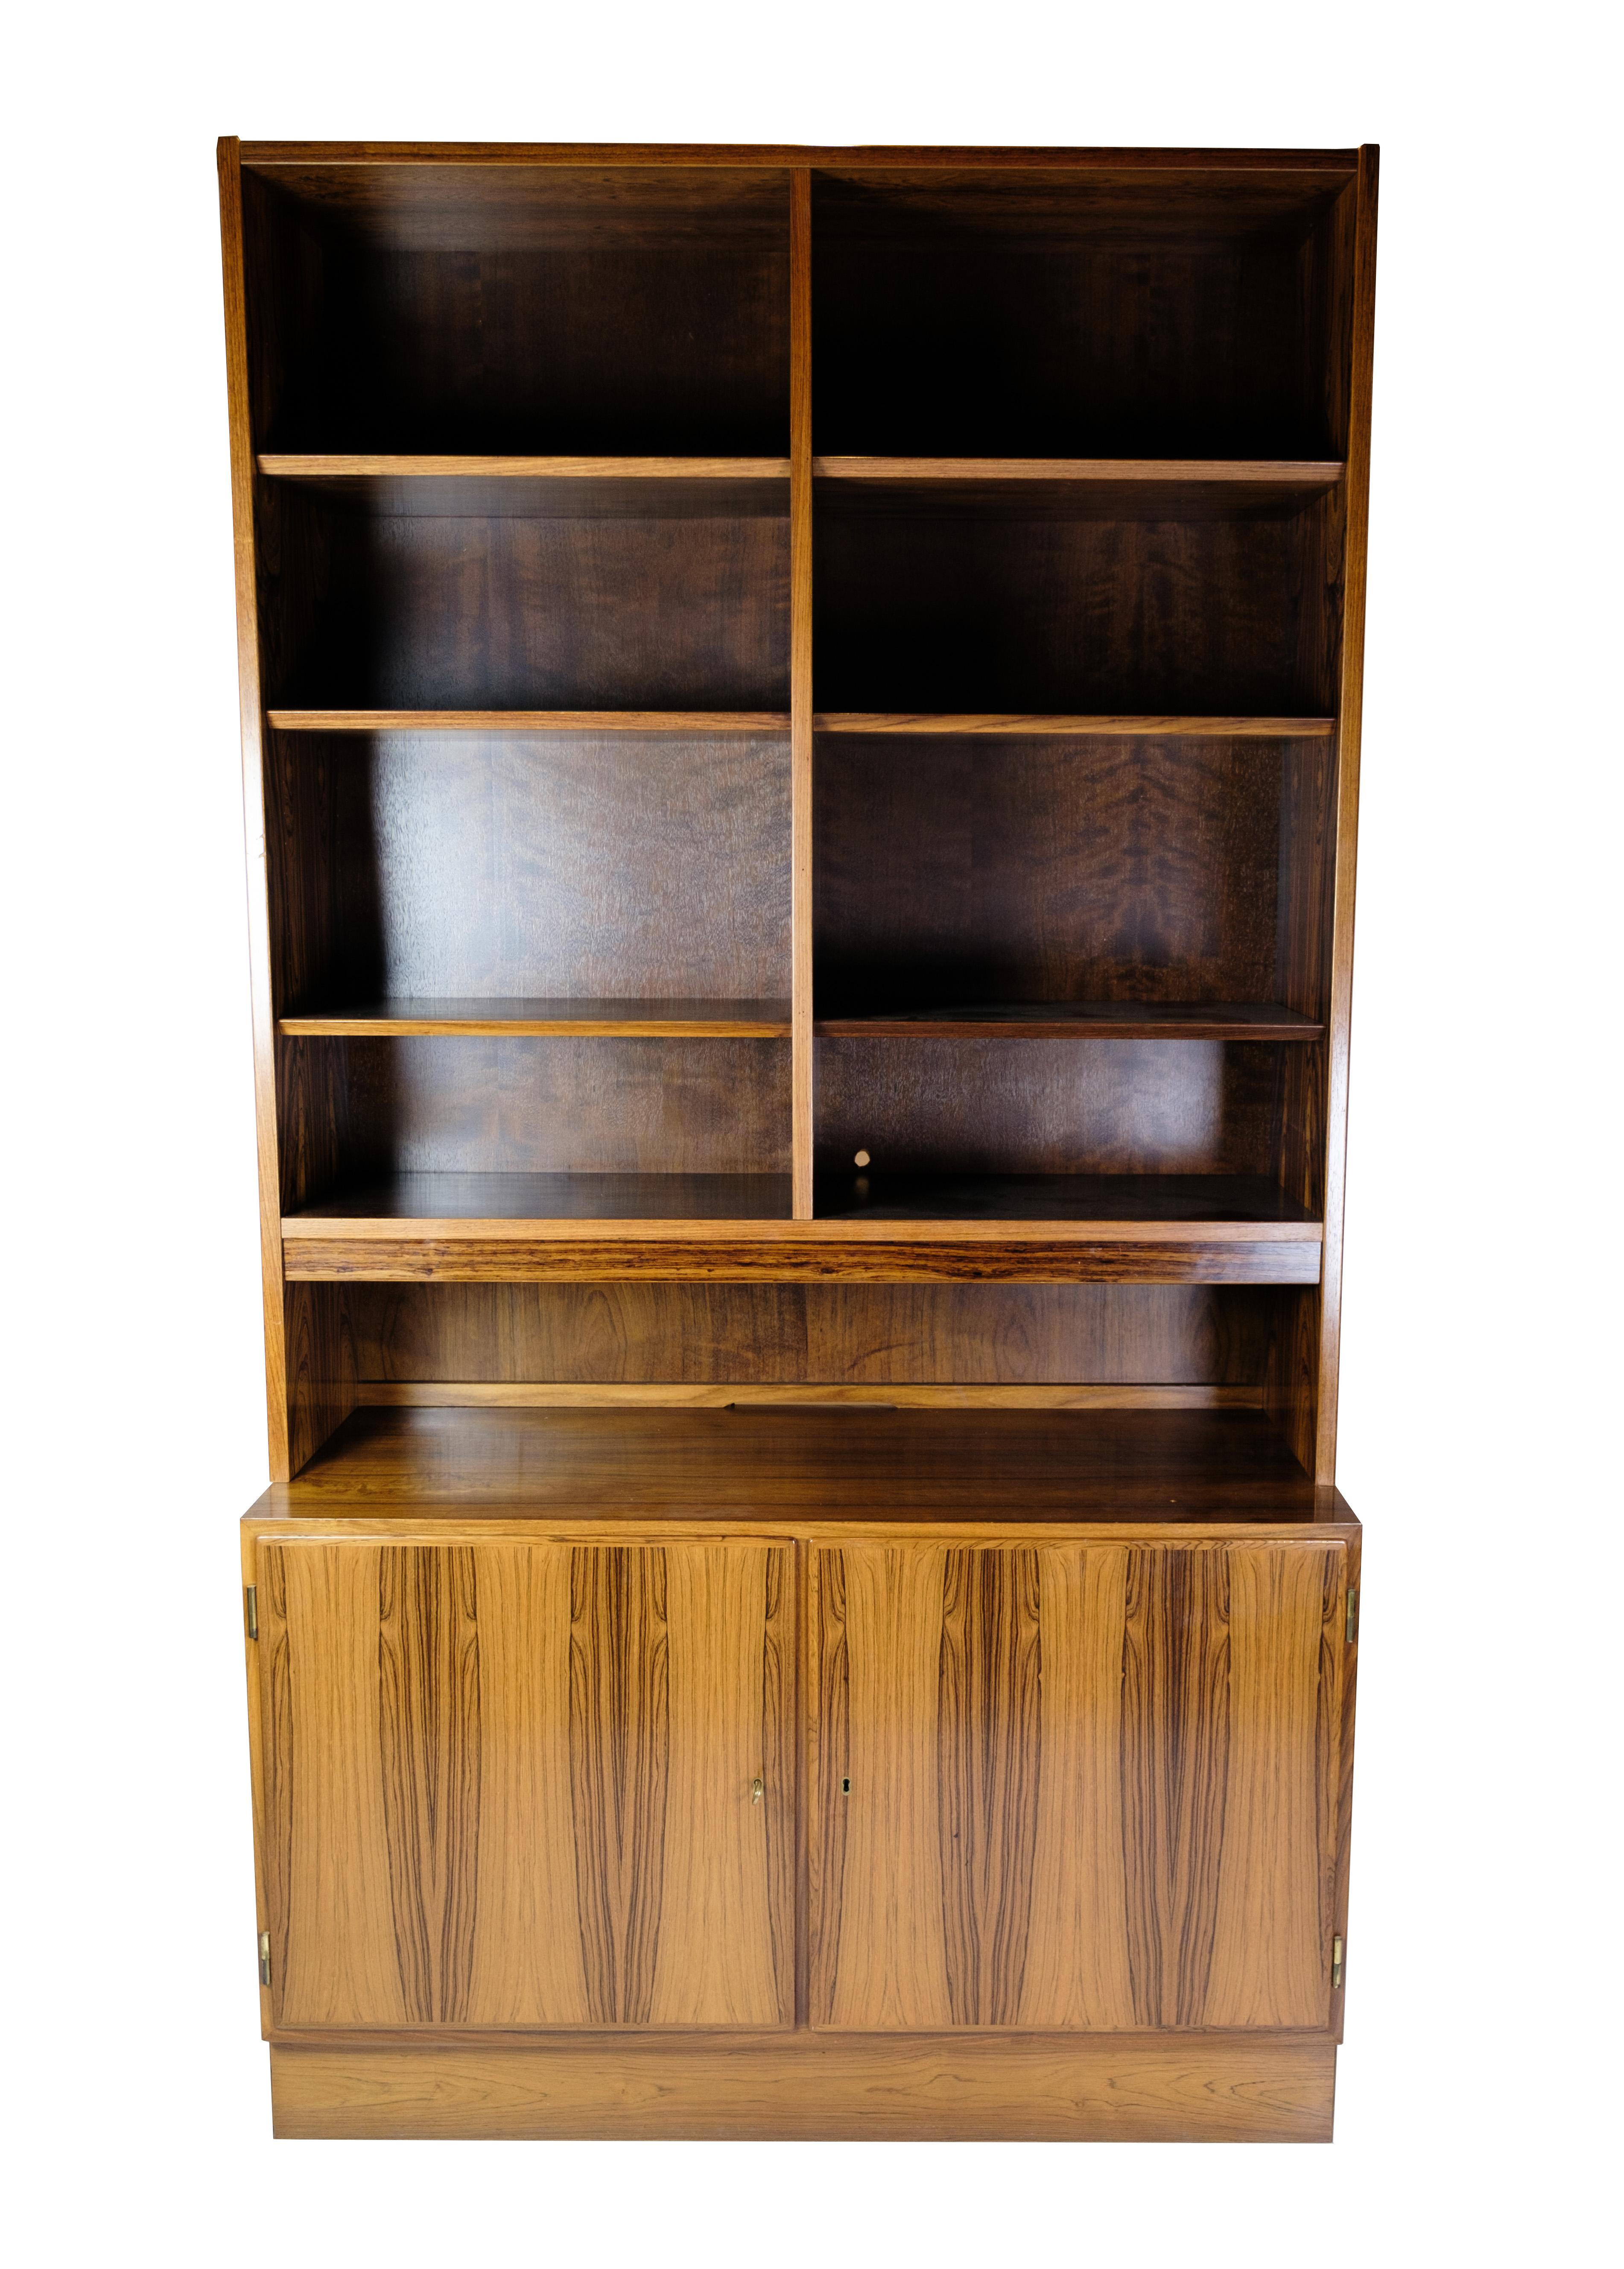 This bookcase in rosewood is a magnificent example of Danish furniture design. Created by Hundevad, a renowned manufacturer with a history of quality and craftsmanship, this bookcase is a symbol of Danish design heritage.

The natural beauty and